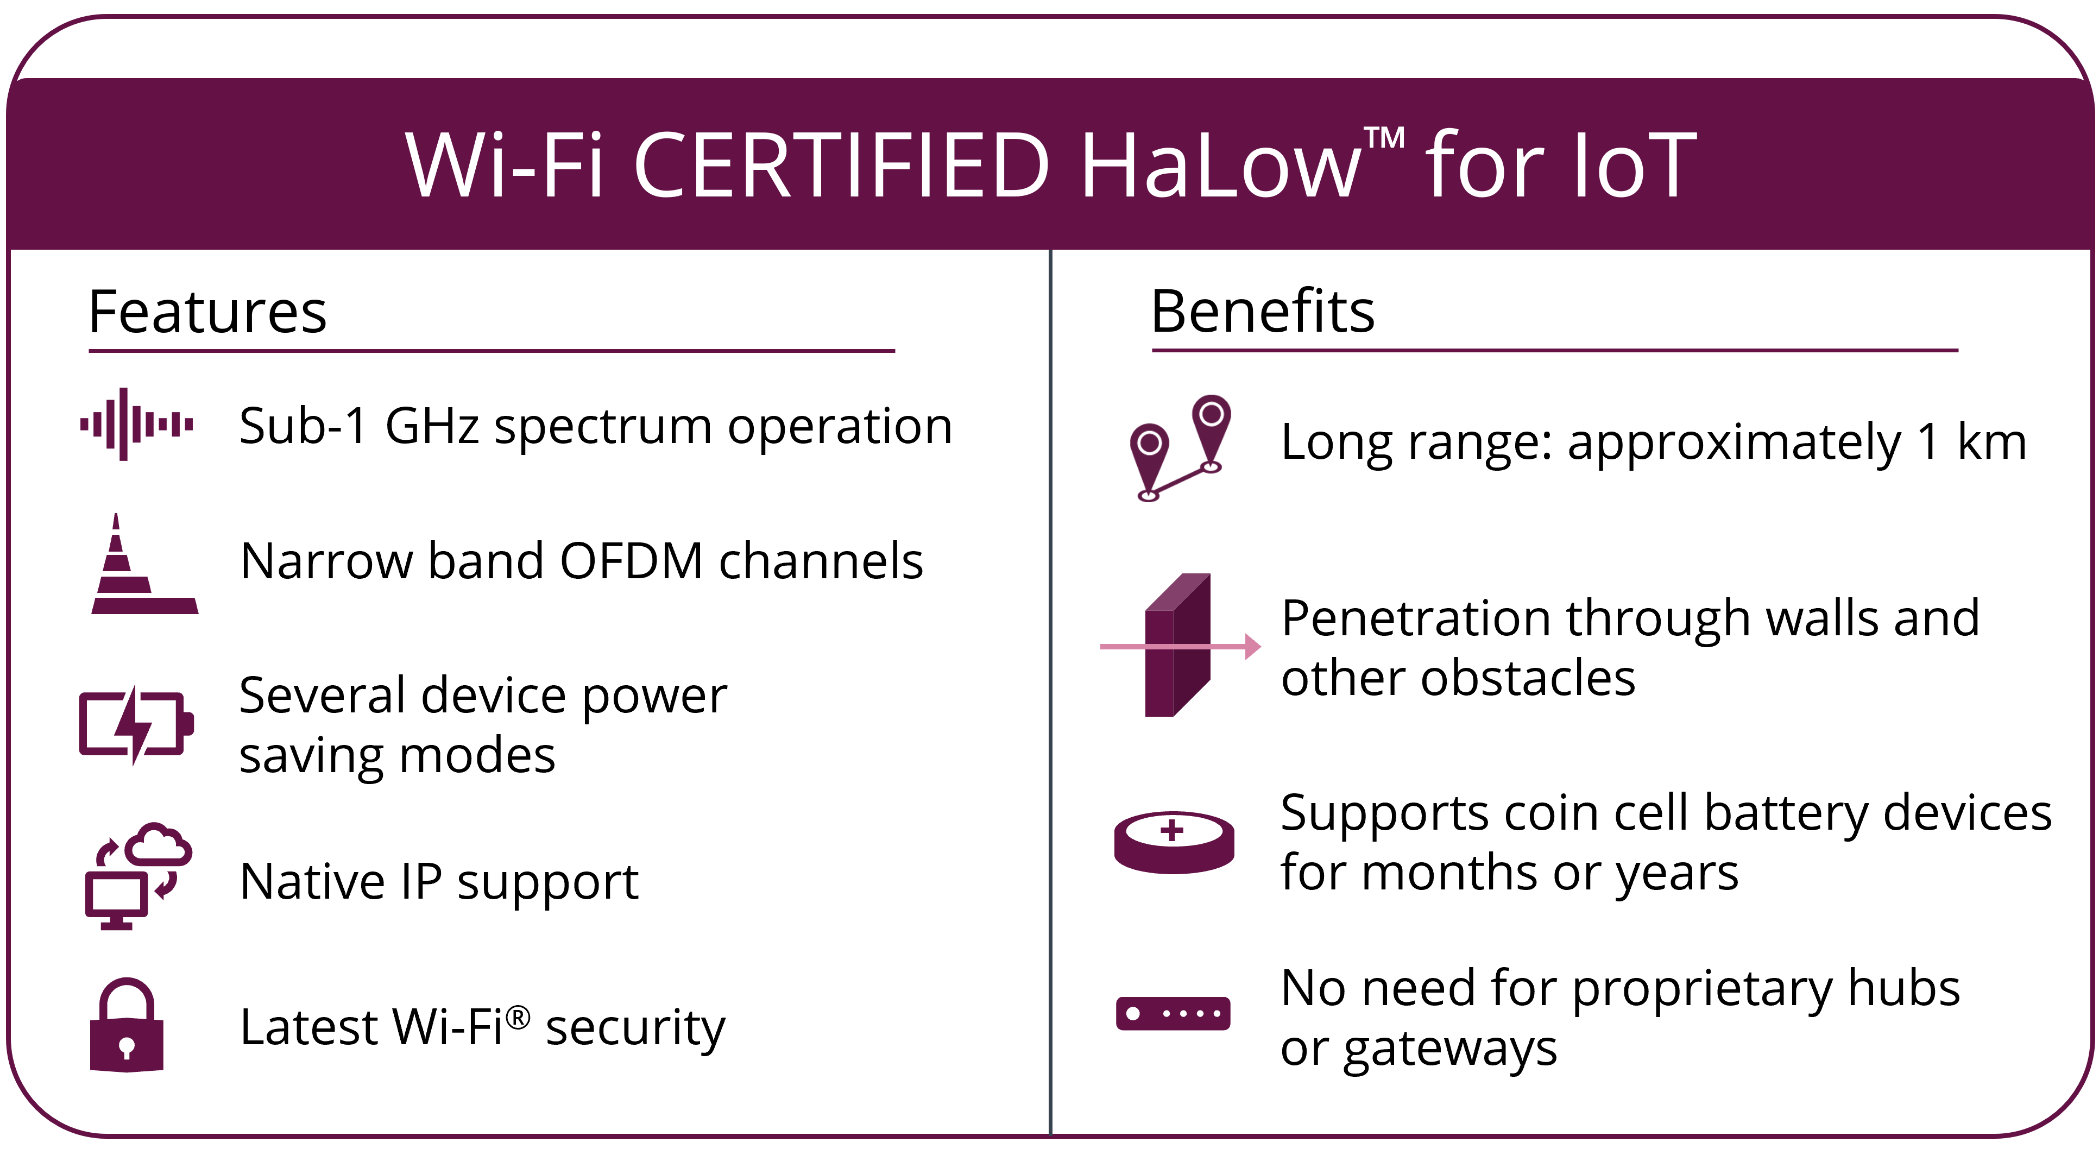 wi-fi halow features